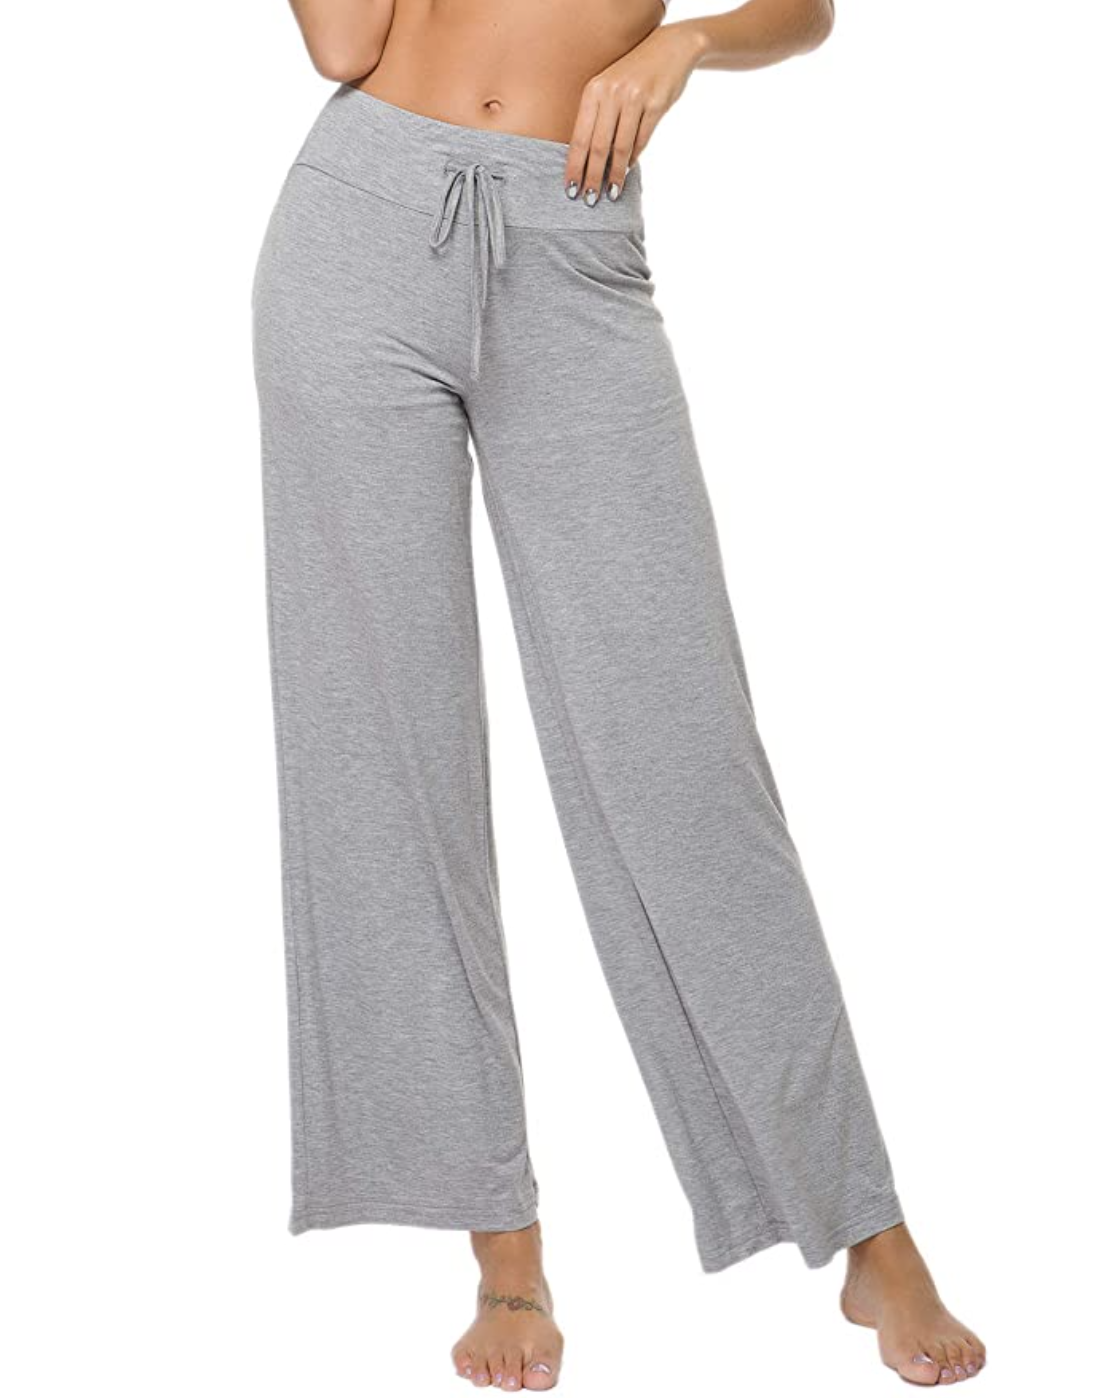 These Lightweight Bamboo Pants Make the Perfect Pajamas ...